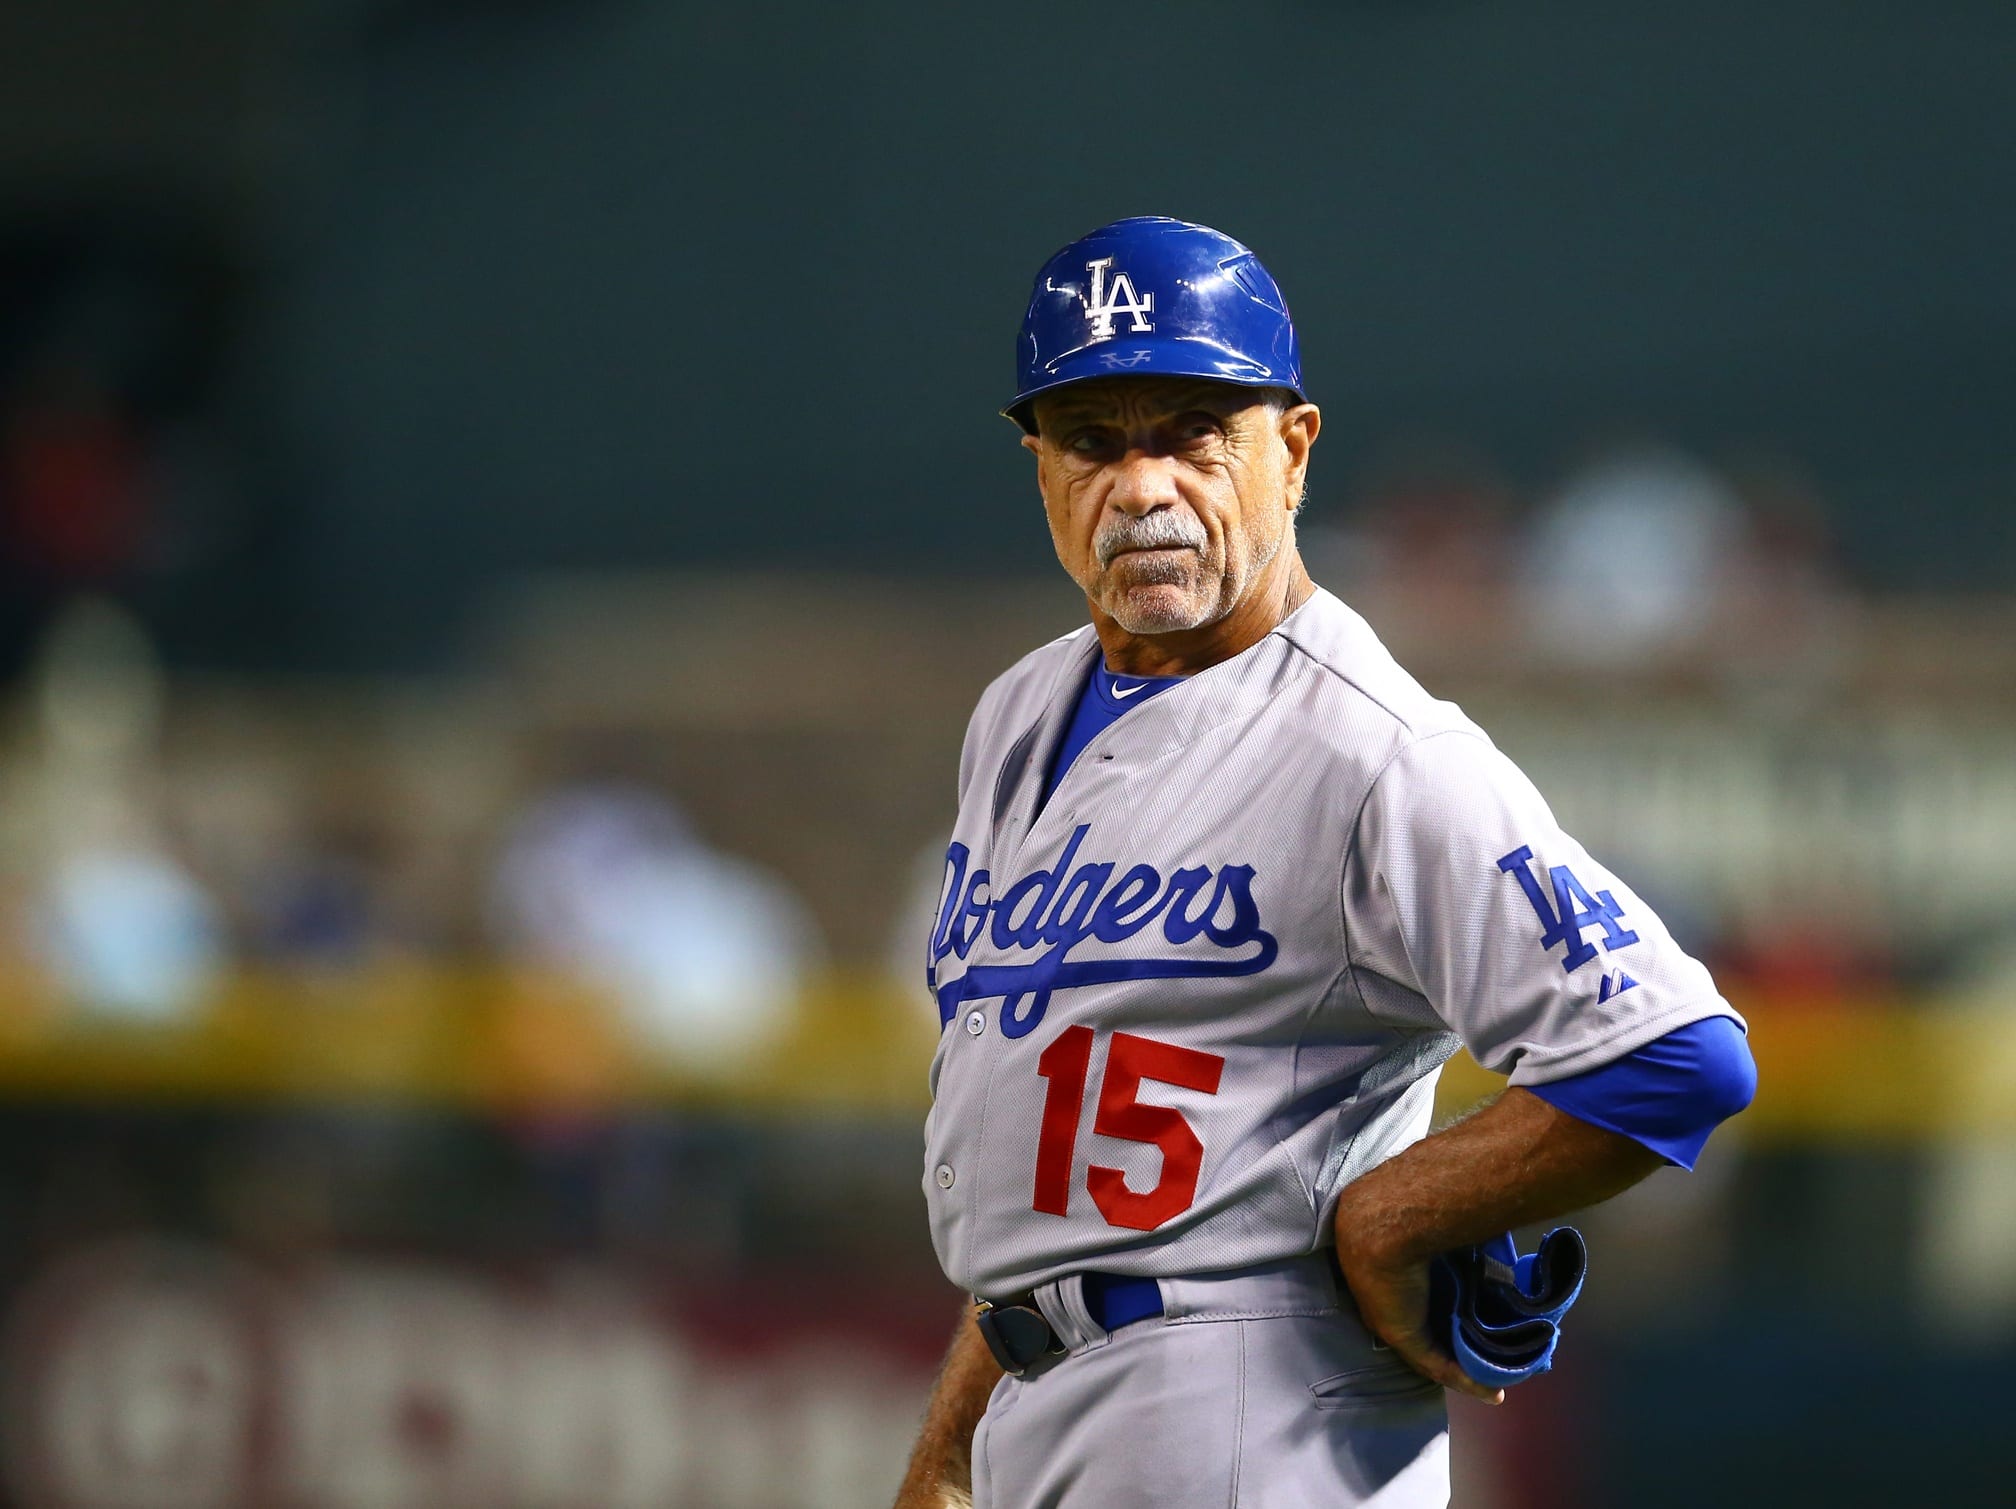 Dodgers News: Davey Lopes Announces Retirement From Baseball